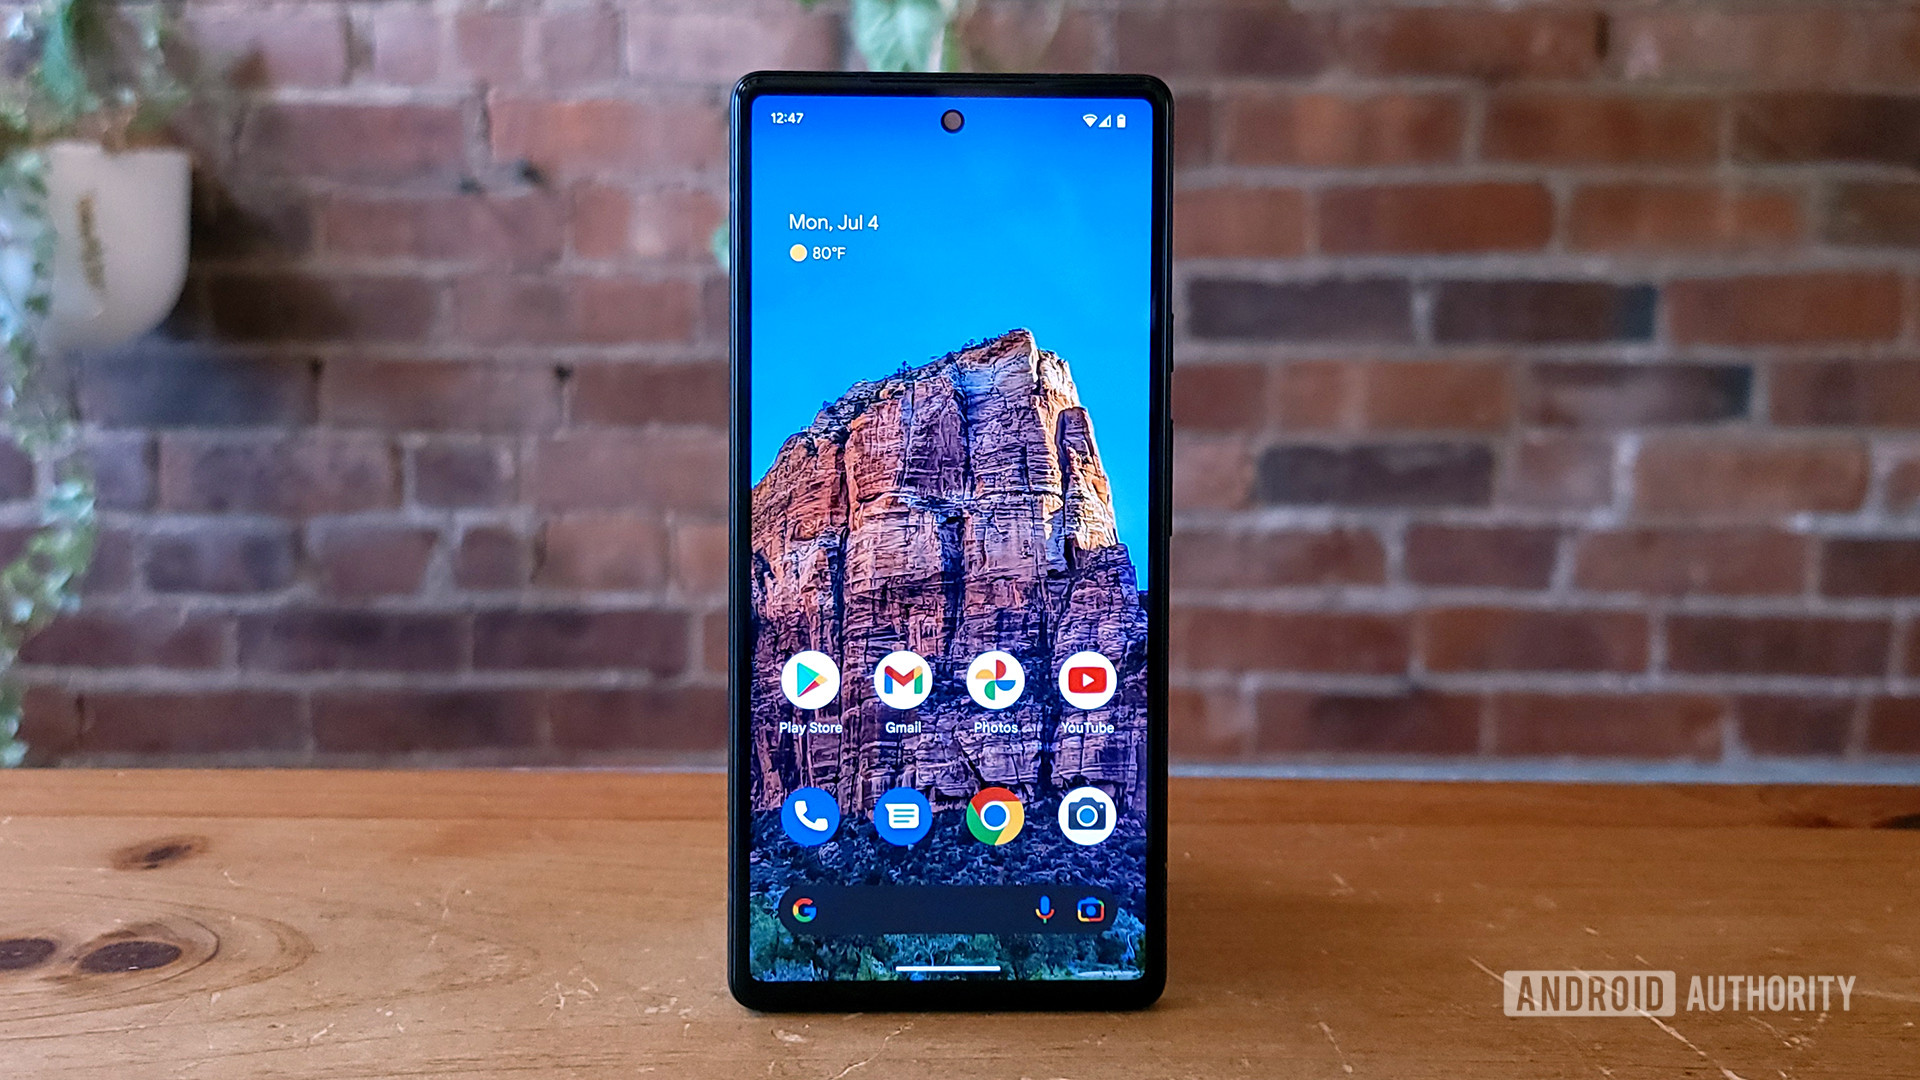 Wallpaper Wednesday: Android wallpapers 2022-07-06 - Android Authority